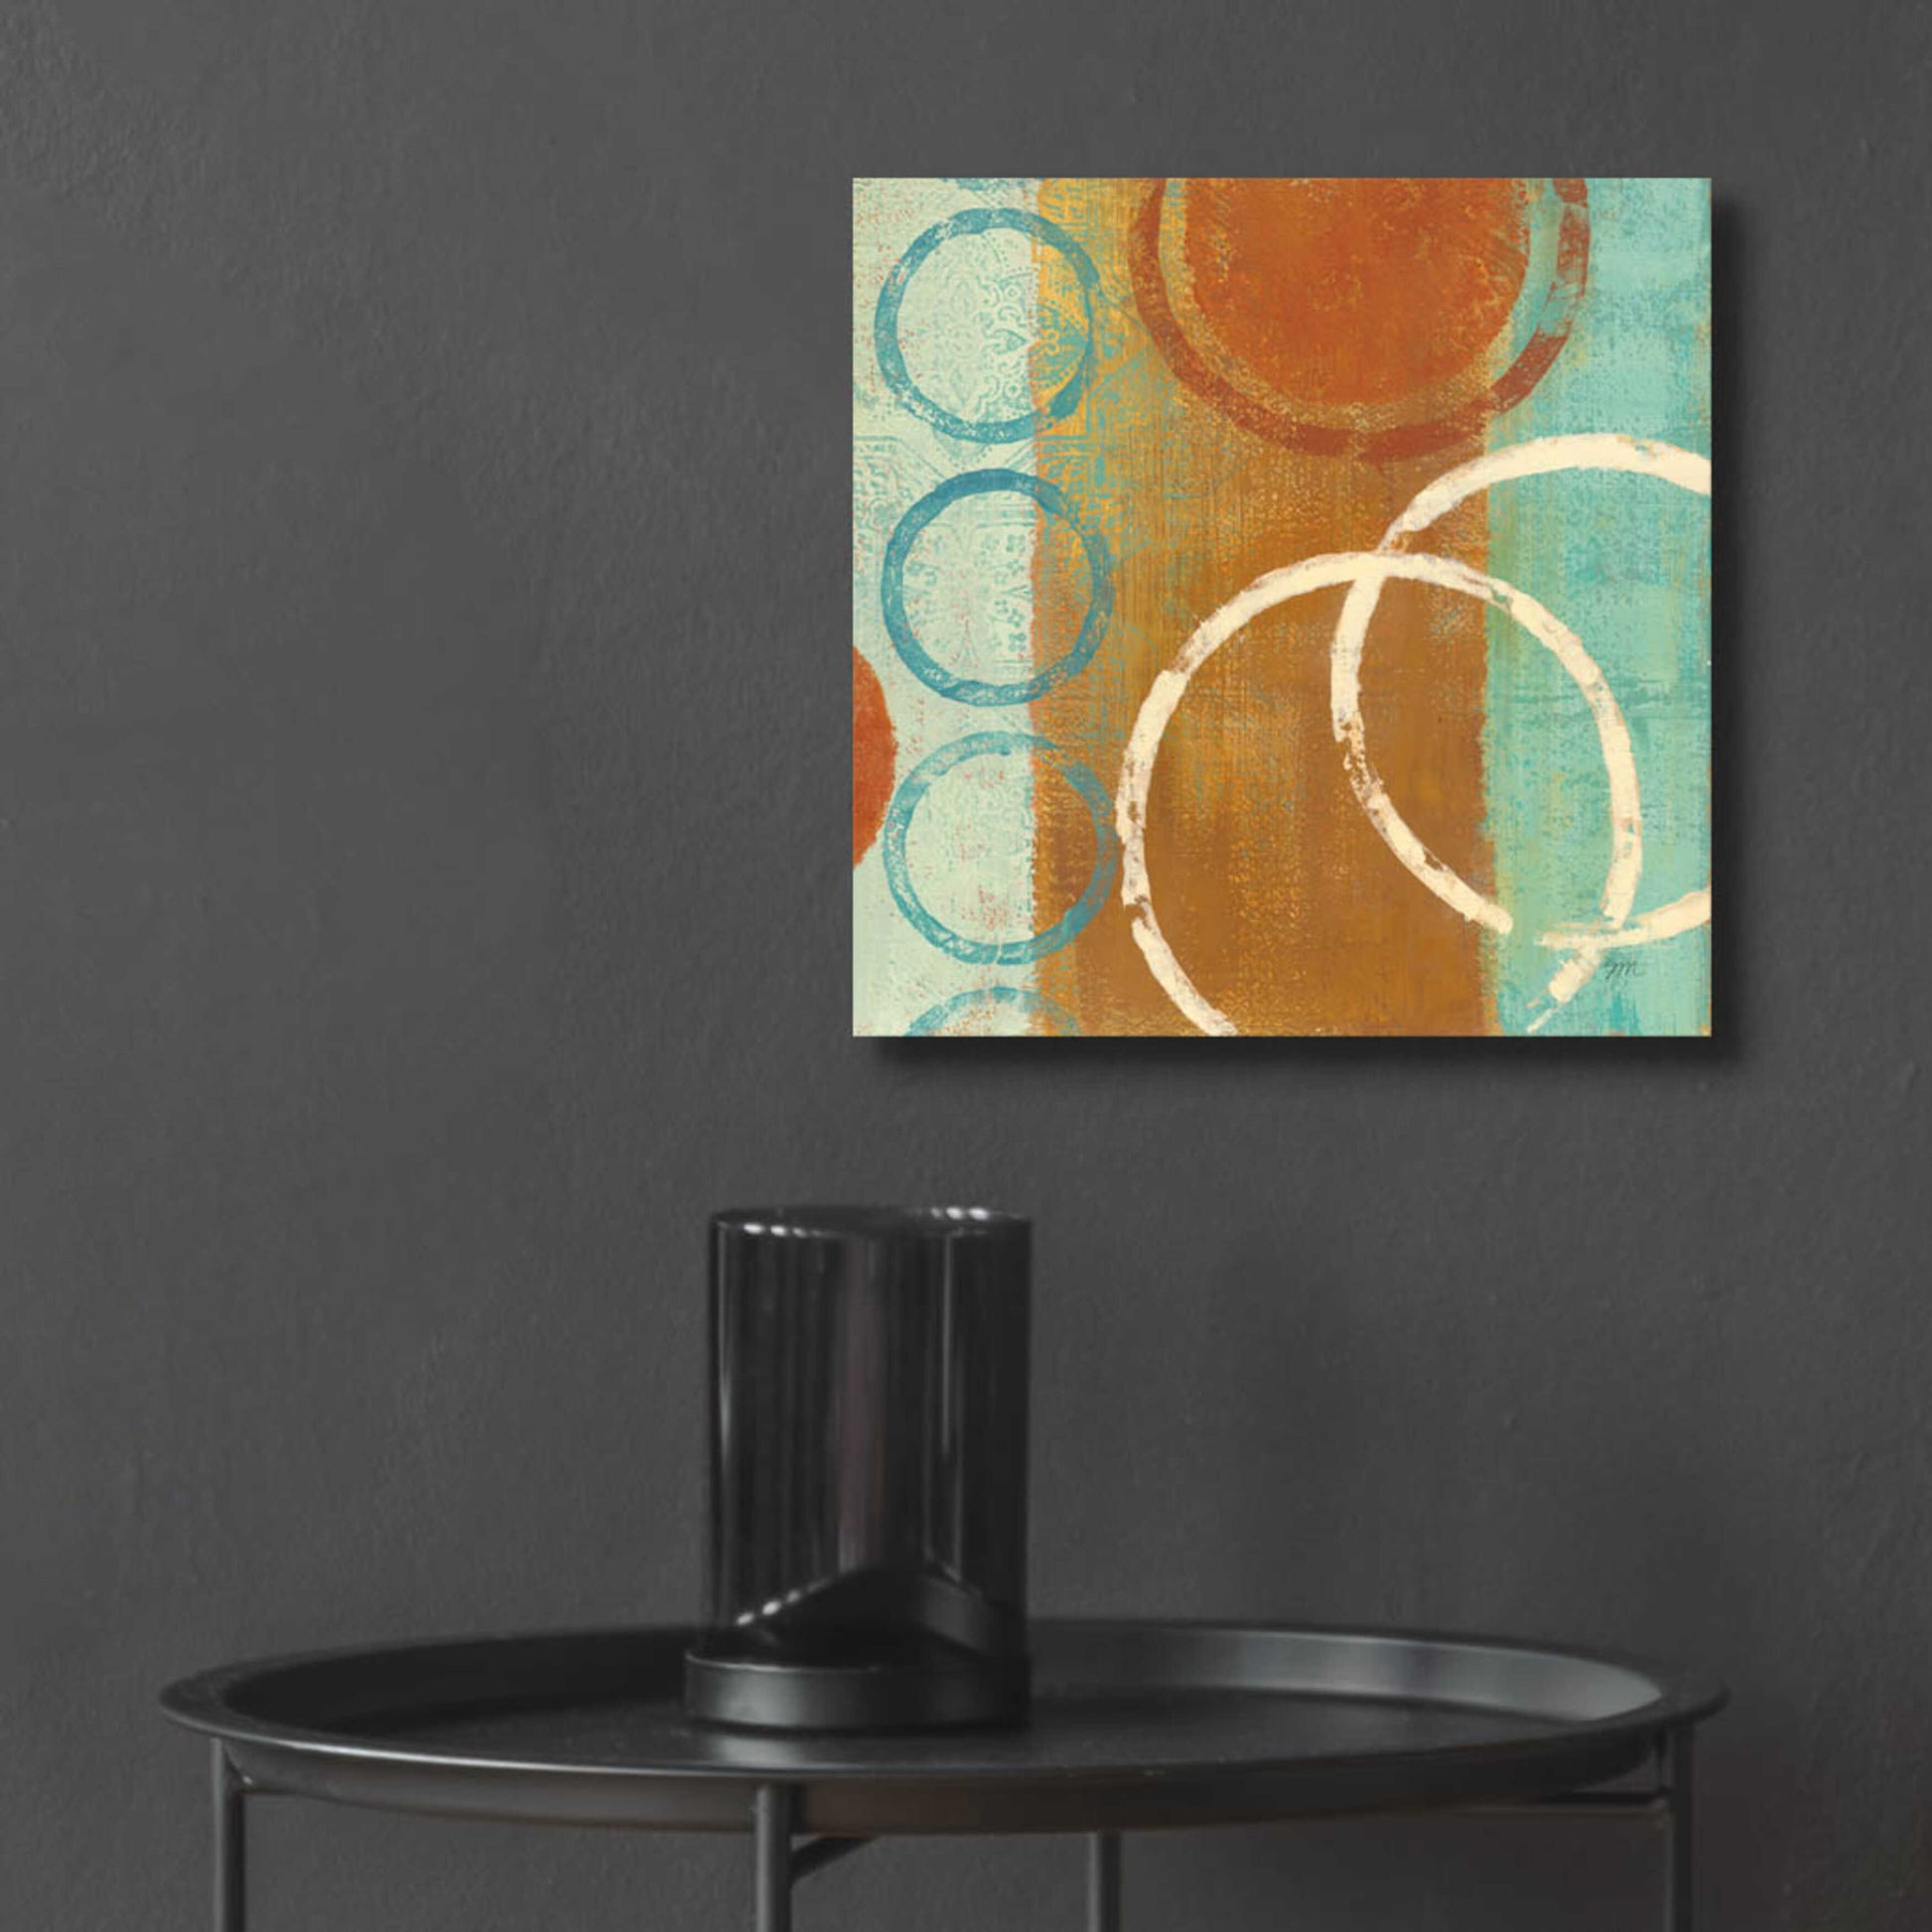 Epic Art 'Abstract of Circles' by Studio Mousseau, Acrylic Glass Wall Art,12x12